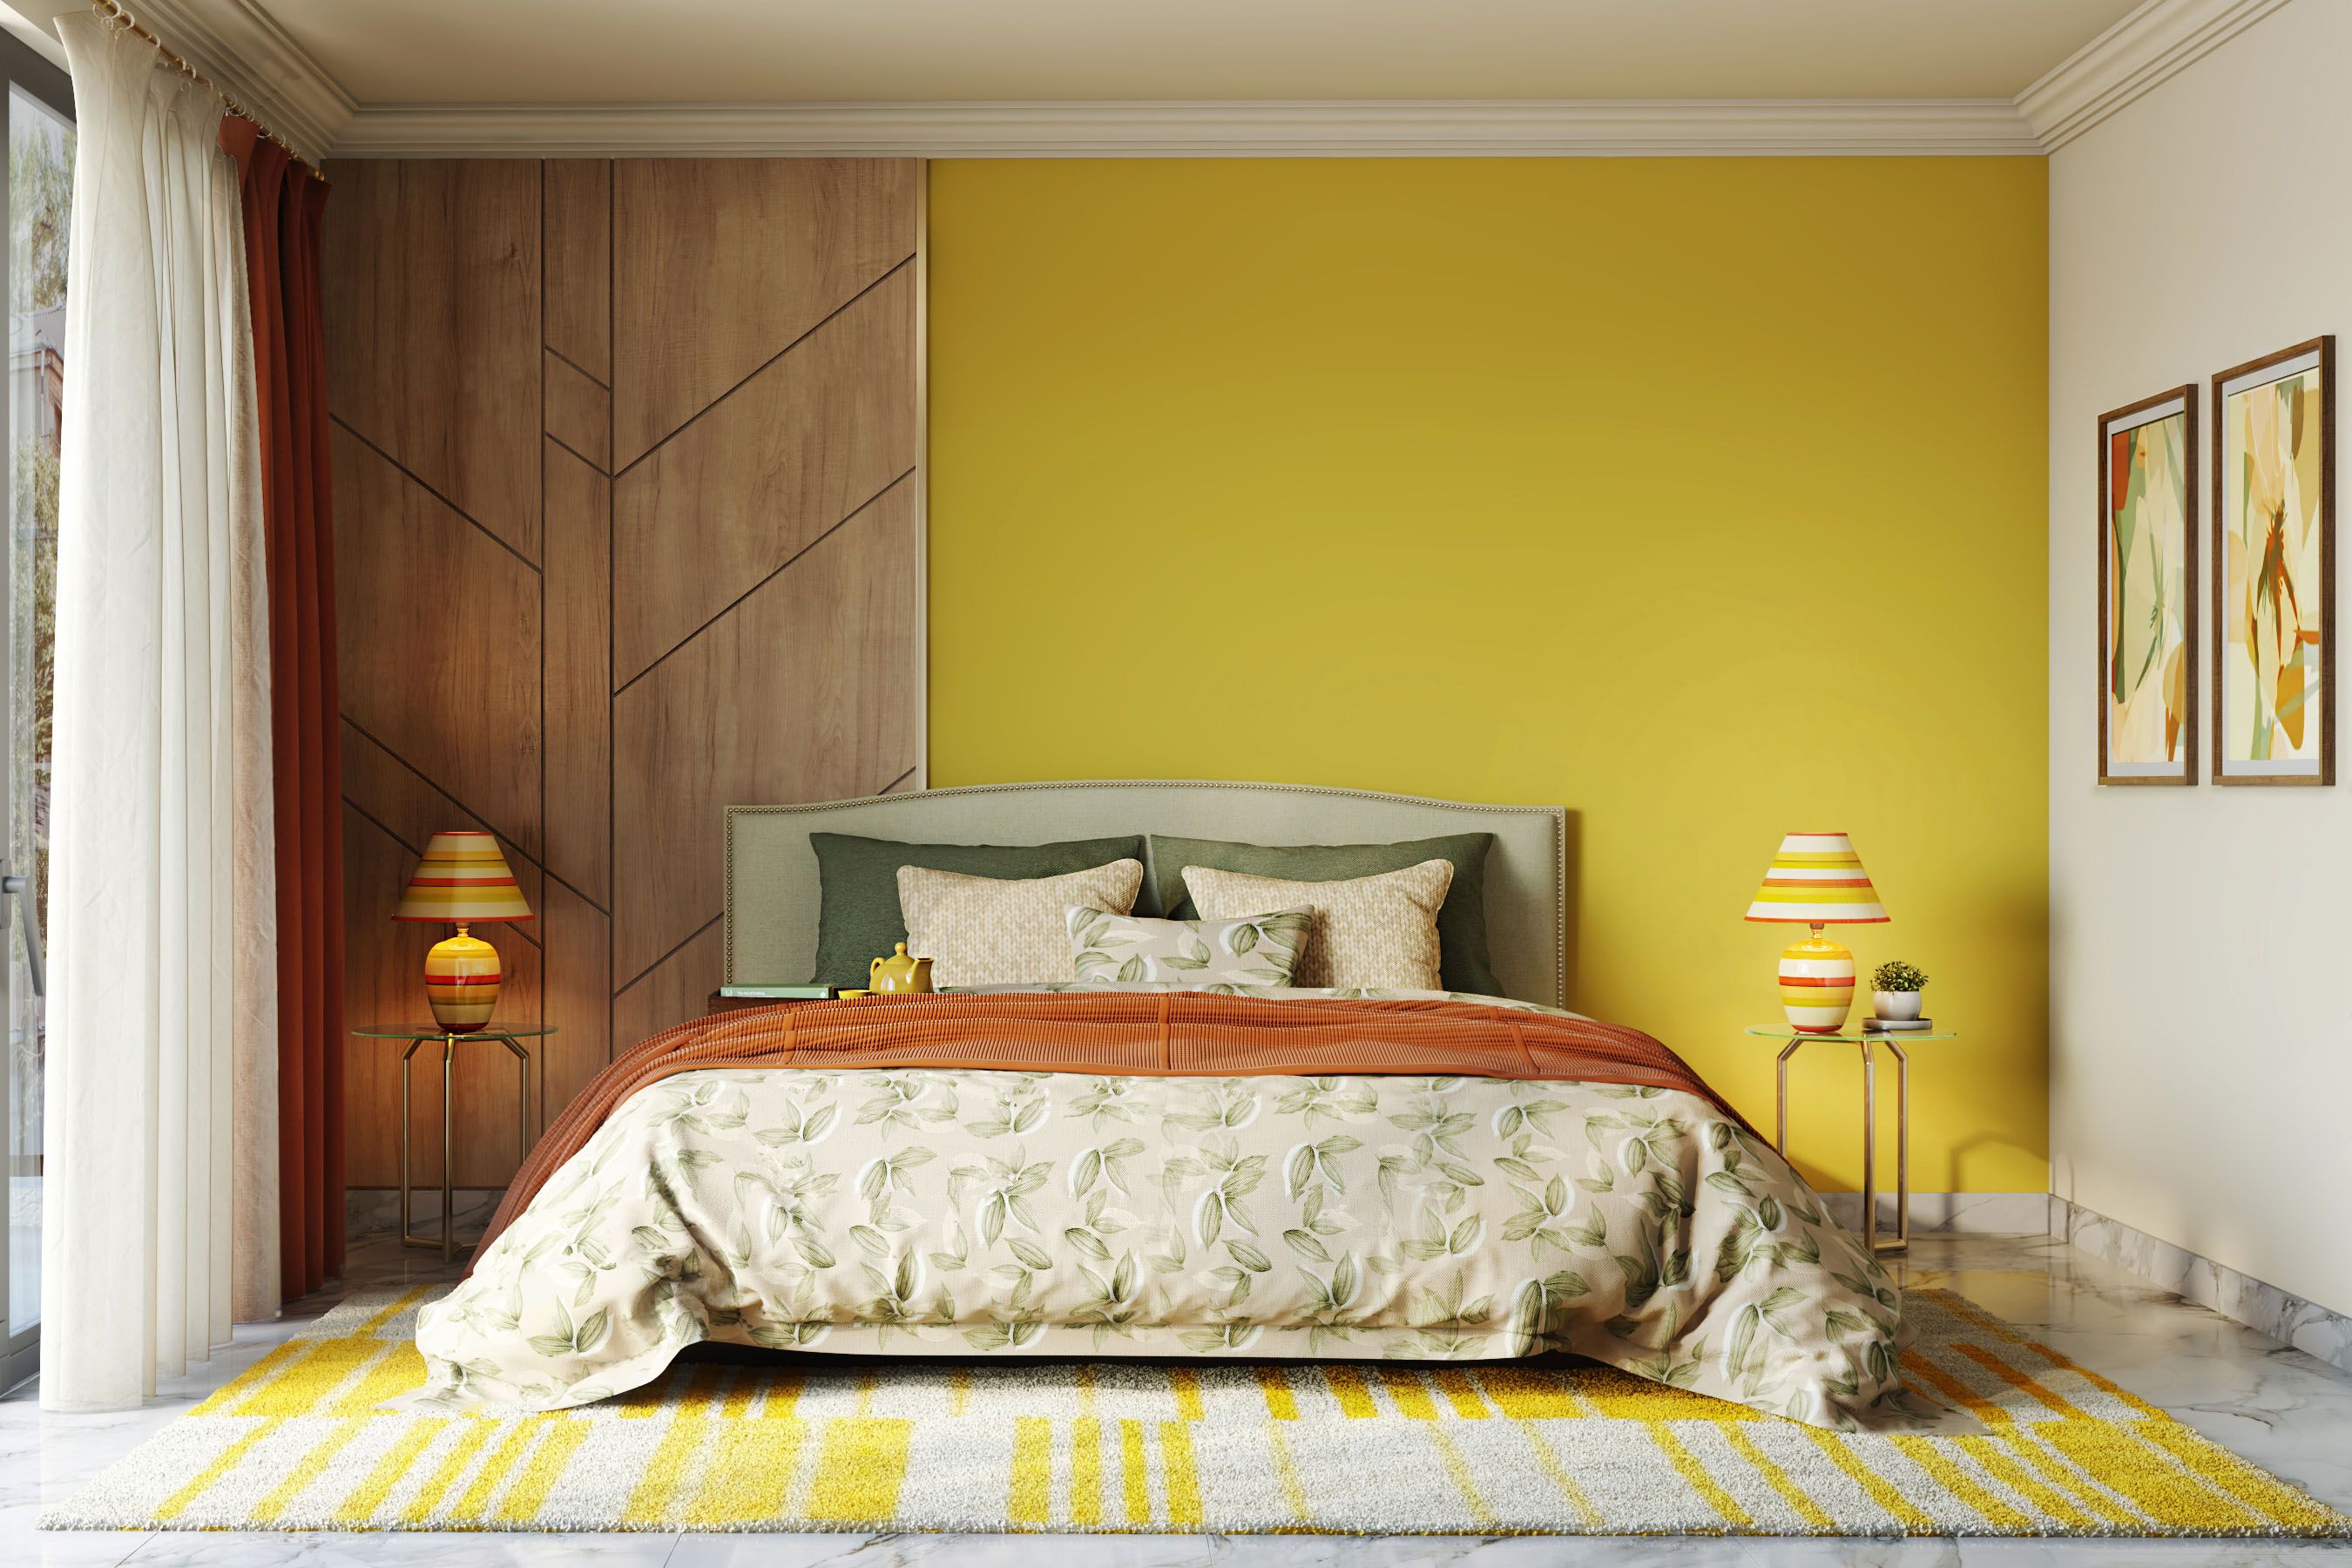 Modern Yellow Bedroom Wall Paint Design With Wooden Wall Panel